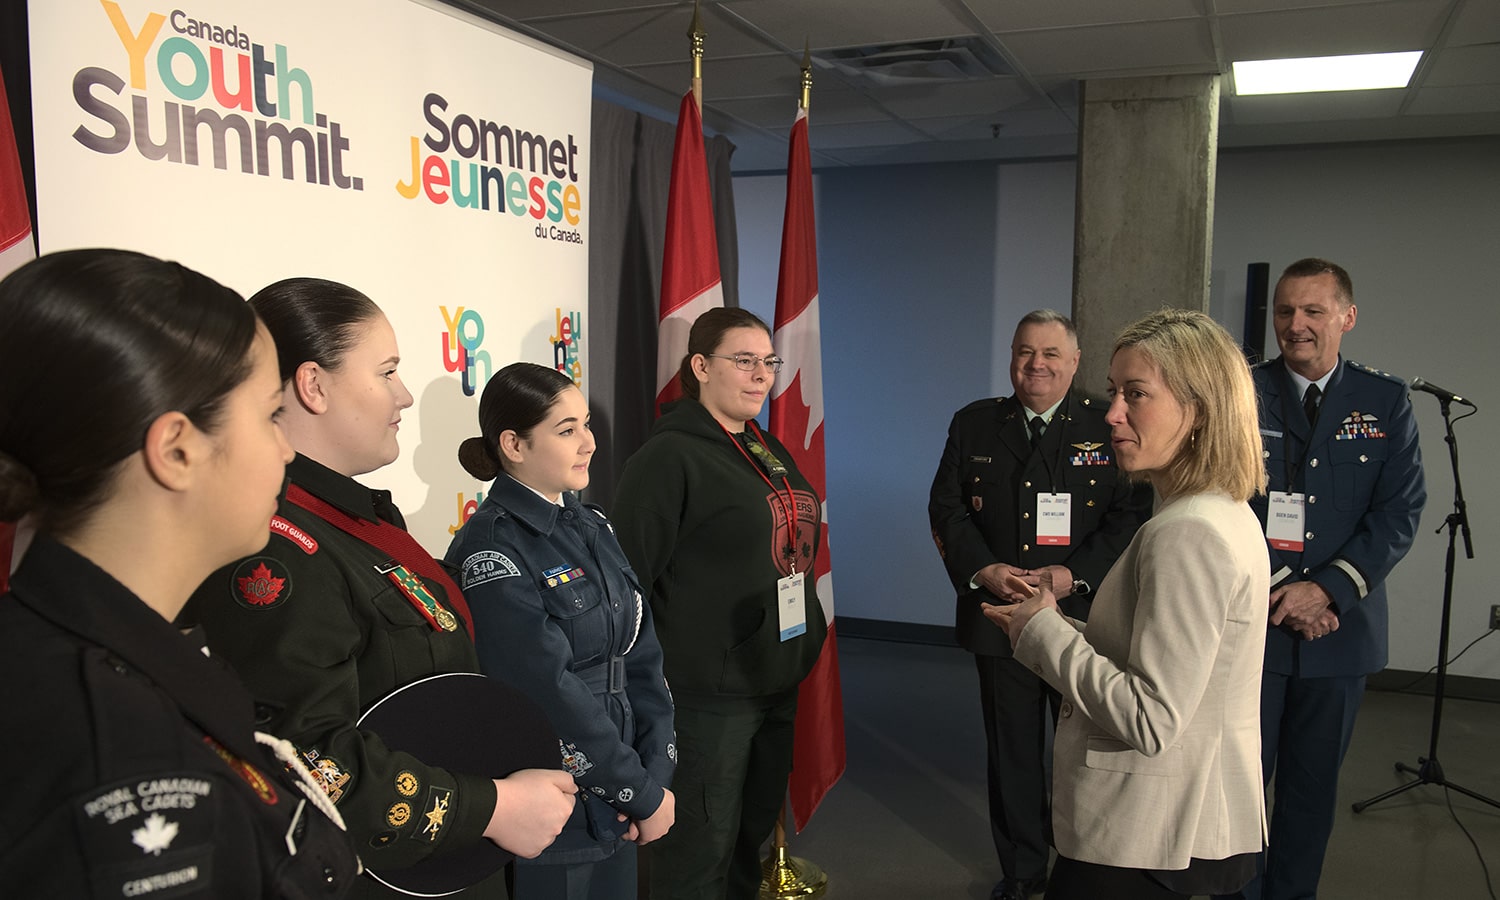 Cadets meeting with RCAF officials at Canada Youth Summit